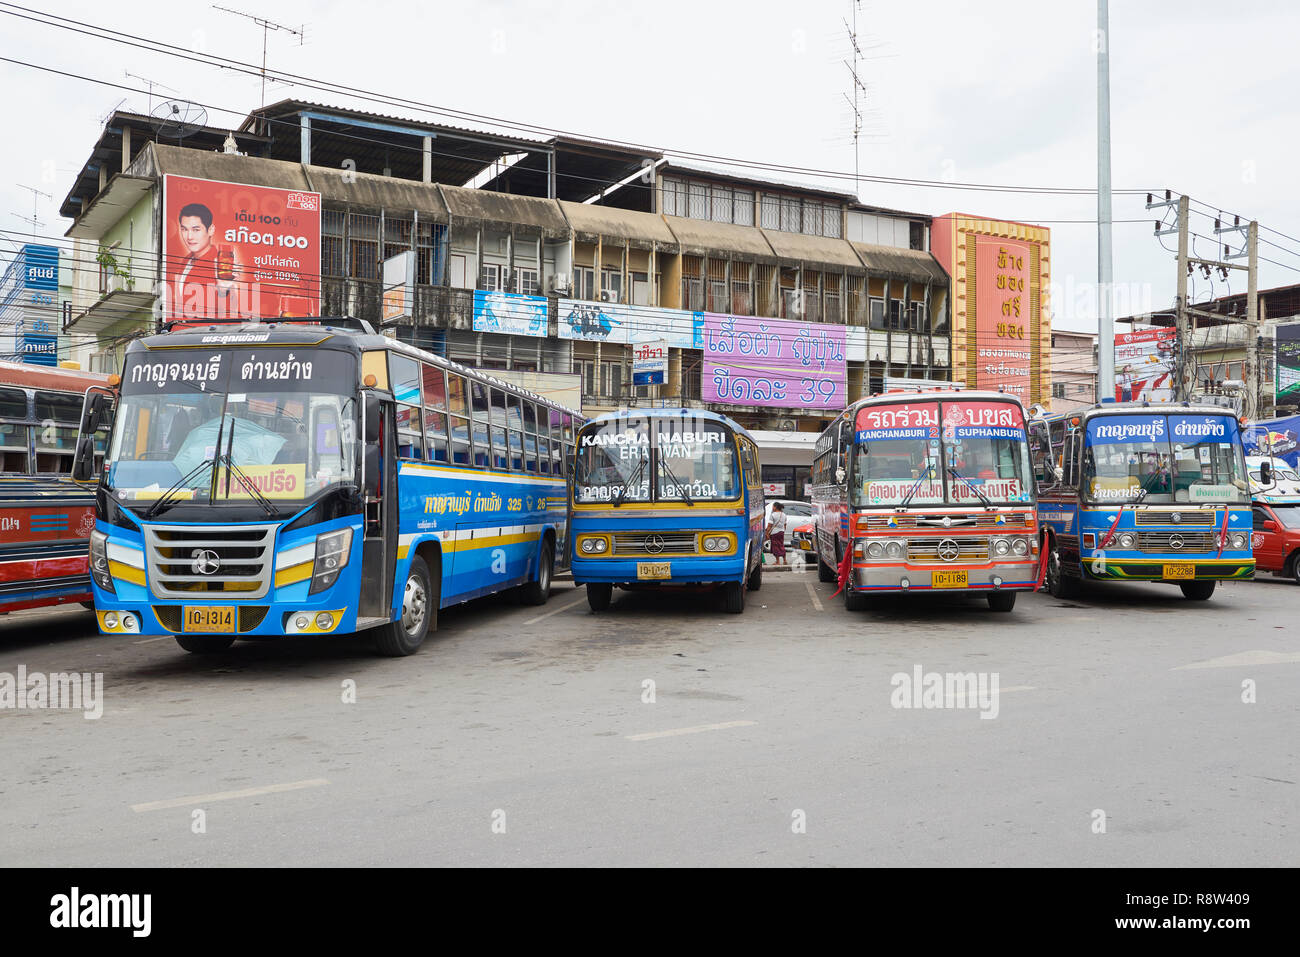 Interurban buses parked at Kanchanaburi central bus terminal, in Thailand. The buses are traditionally very colourful and heavily decorated inside. Stock Photo